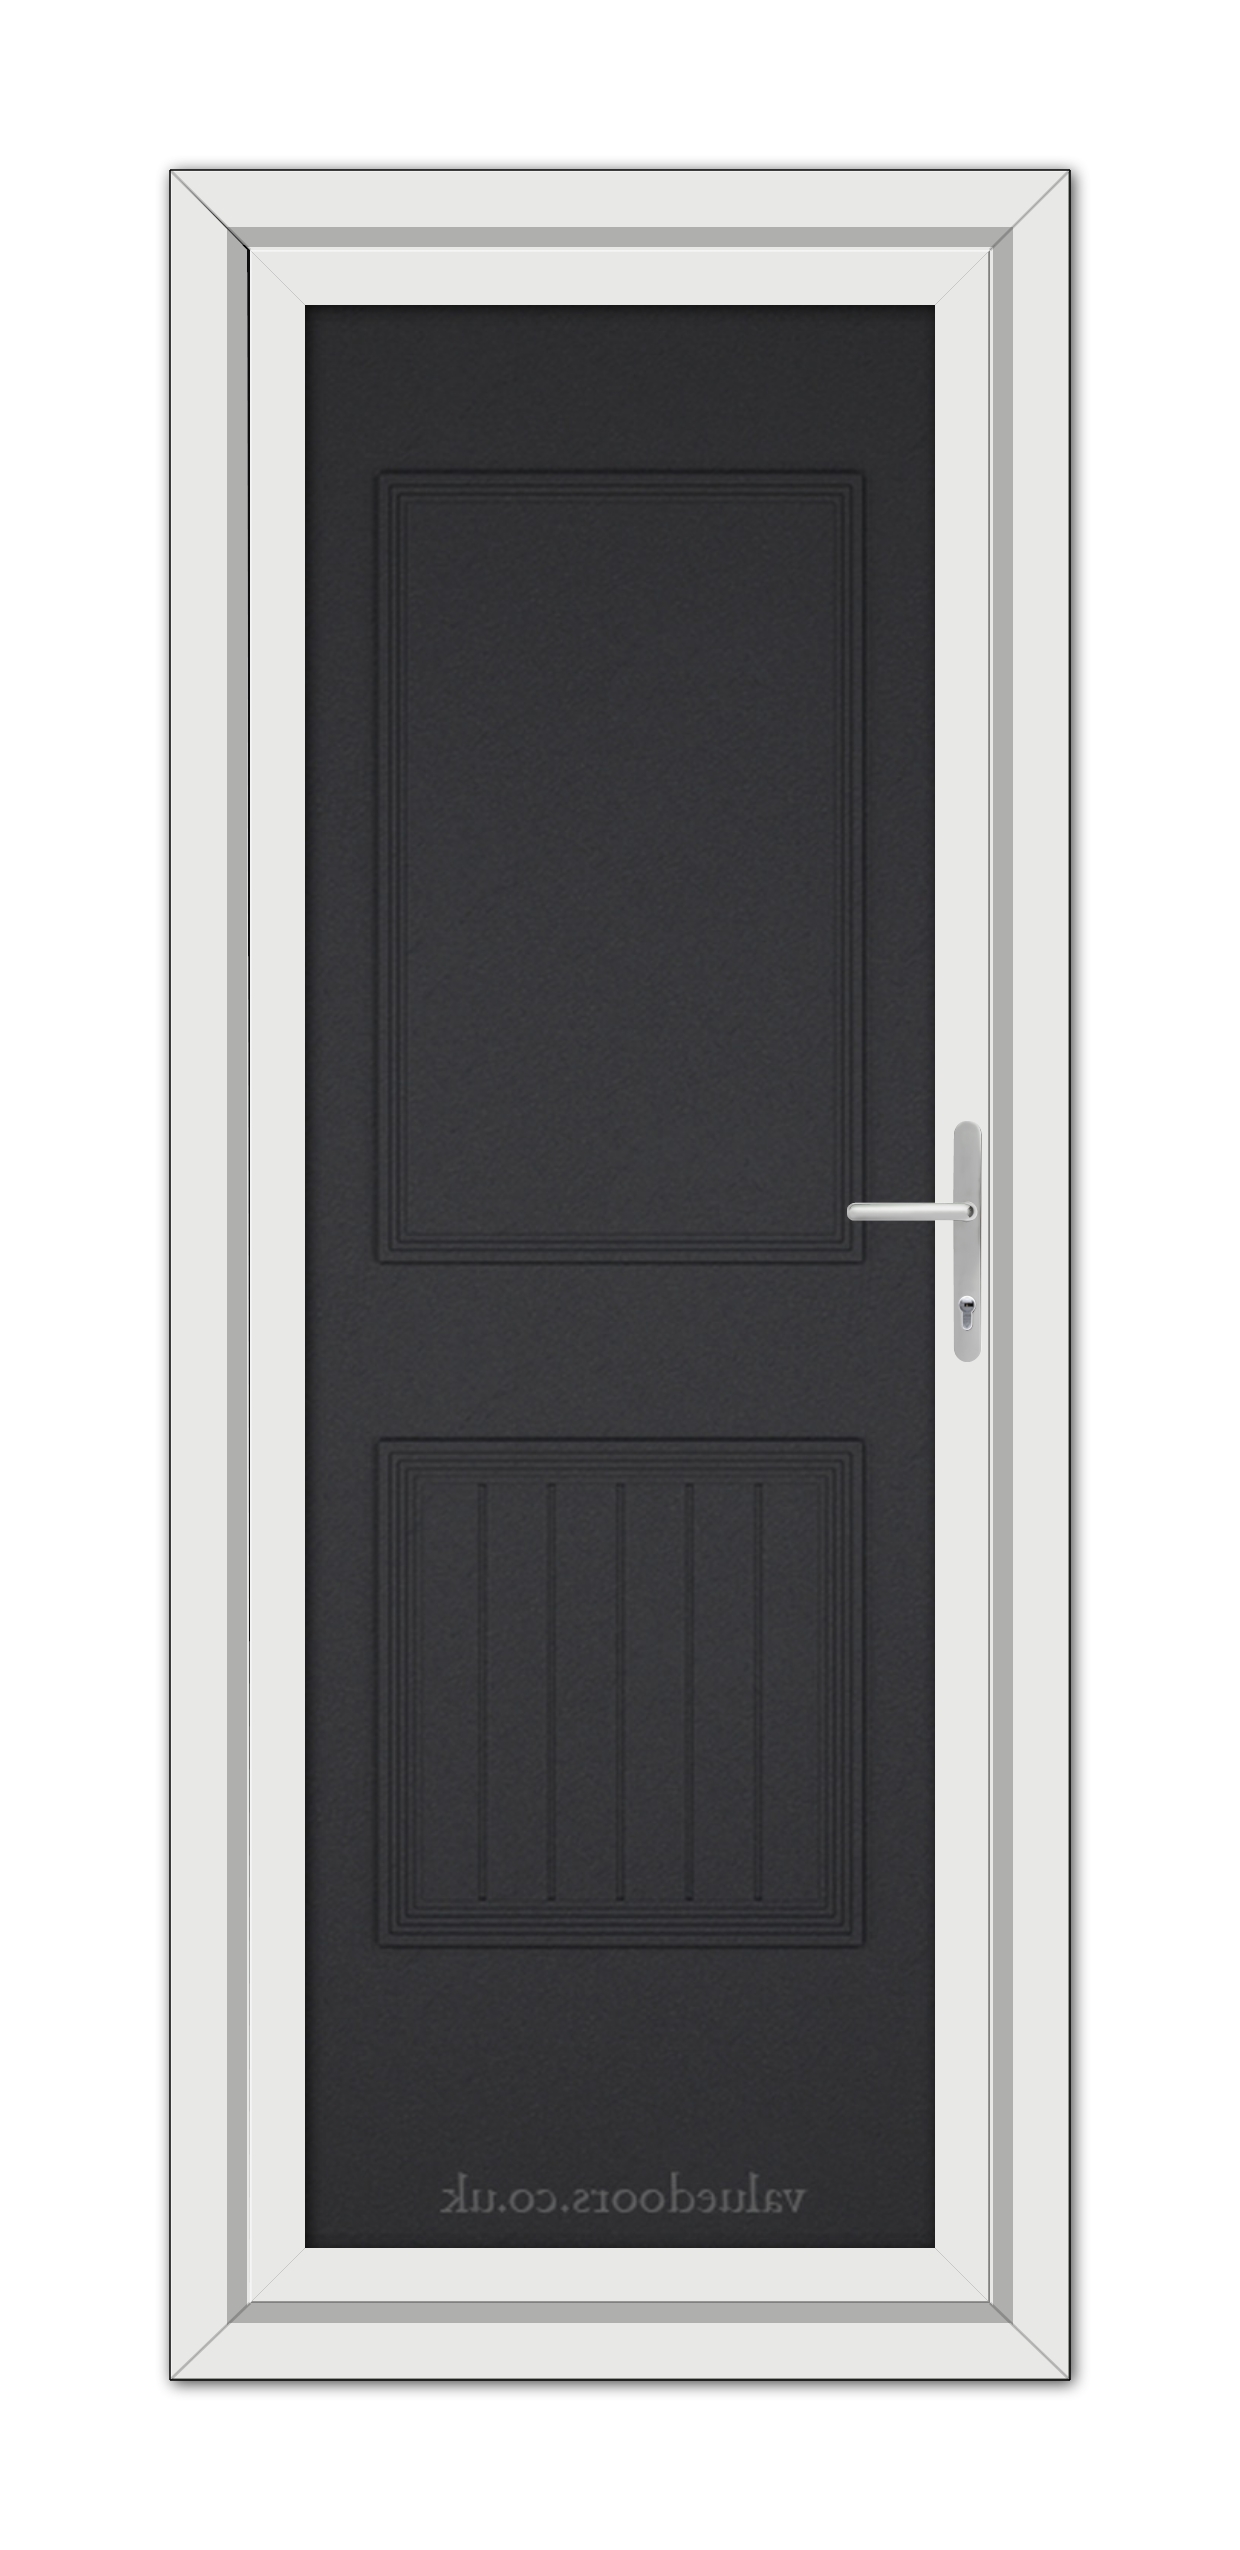 A vertical image of a closed, modern Black Brown Alnwick One Solid uPVC Door with a silver handle, set within a white door frame, viewed from the front.